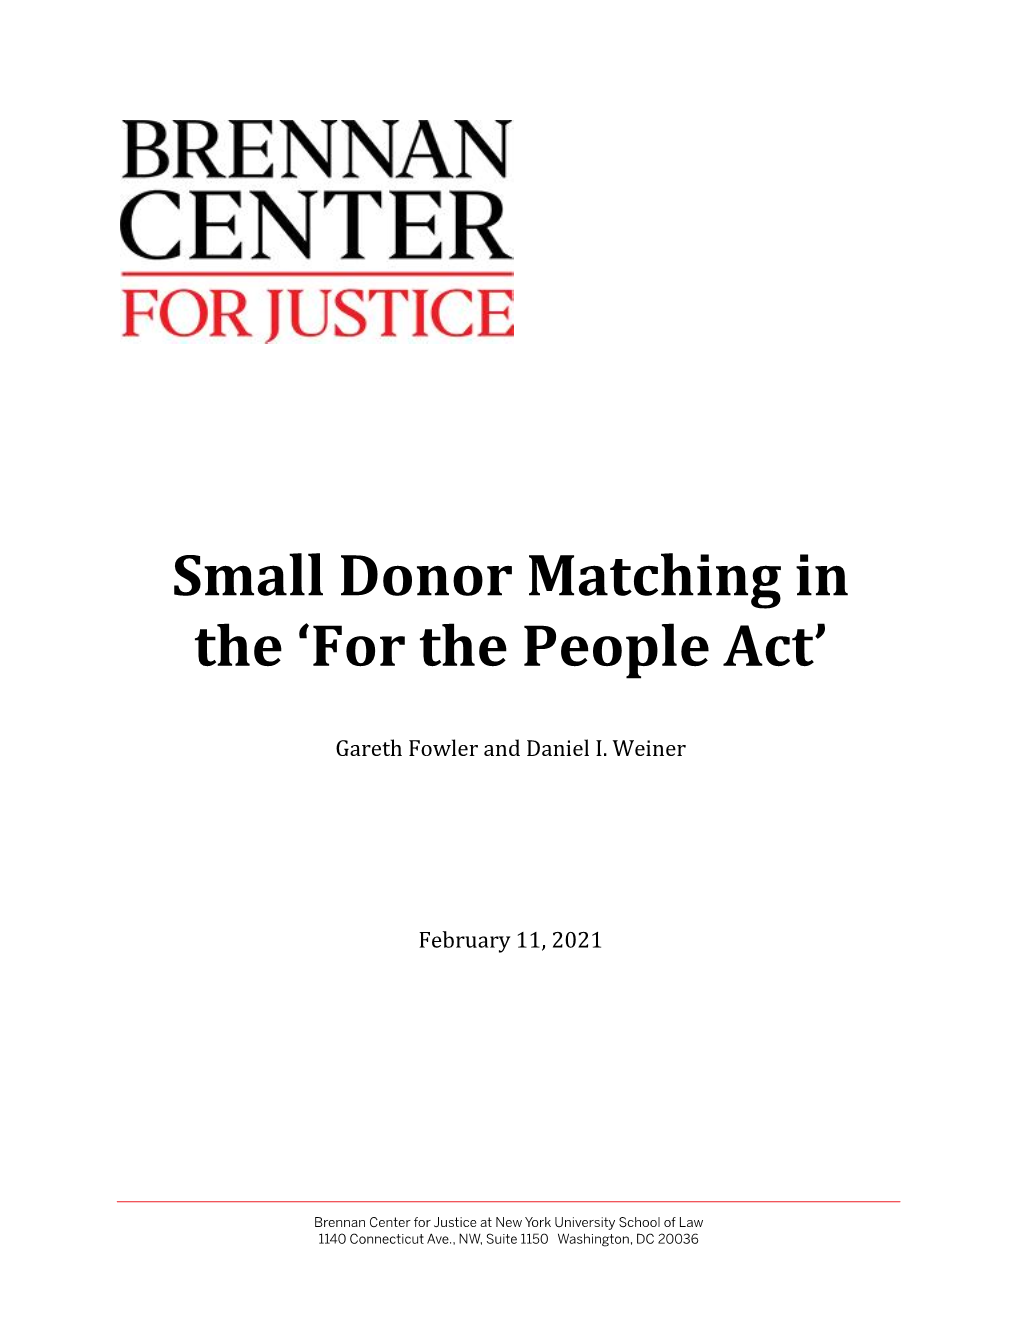 Small Donor Matching in the 'For the People Act'